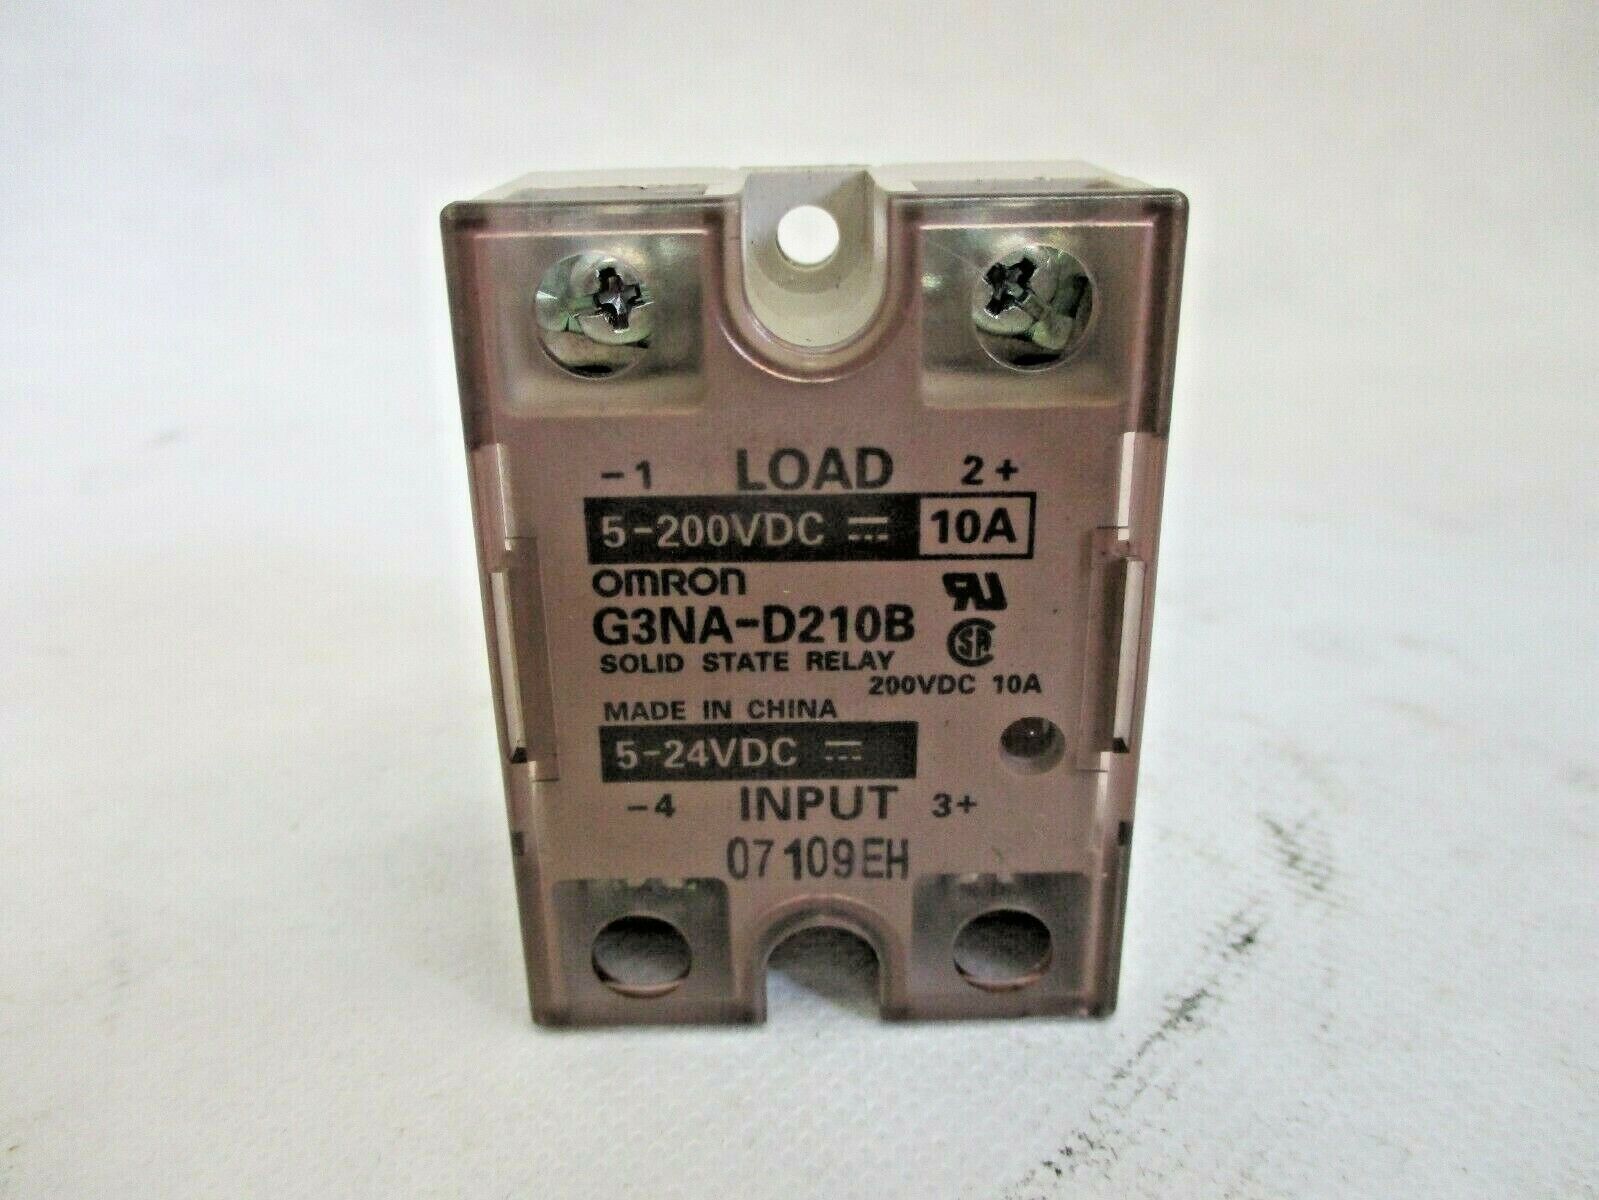 OMRON G3NA-D210B SOLID STATE RELAY 5-24VDC. a granel sin caja